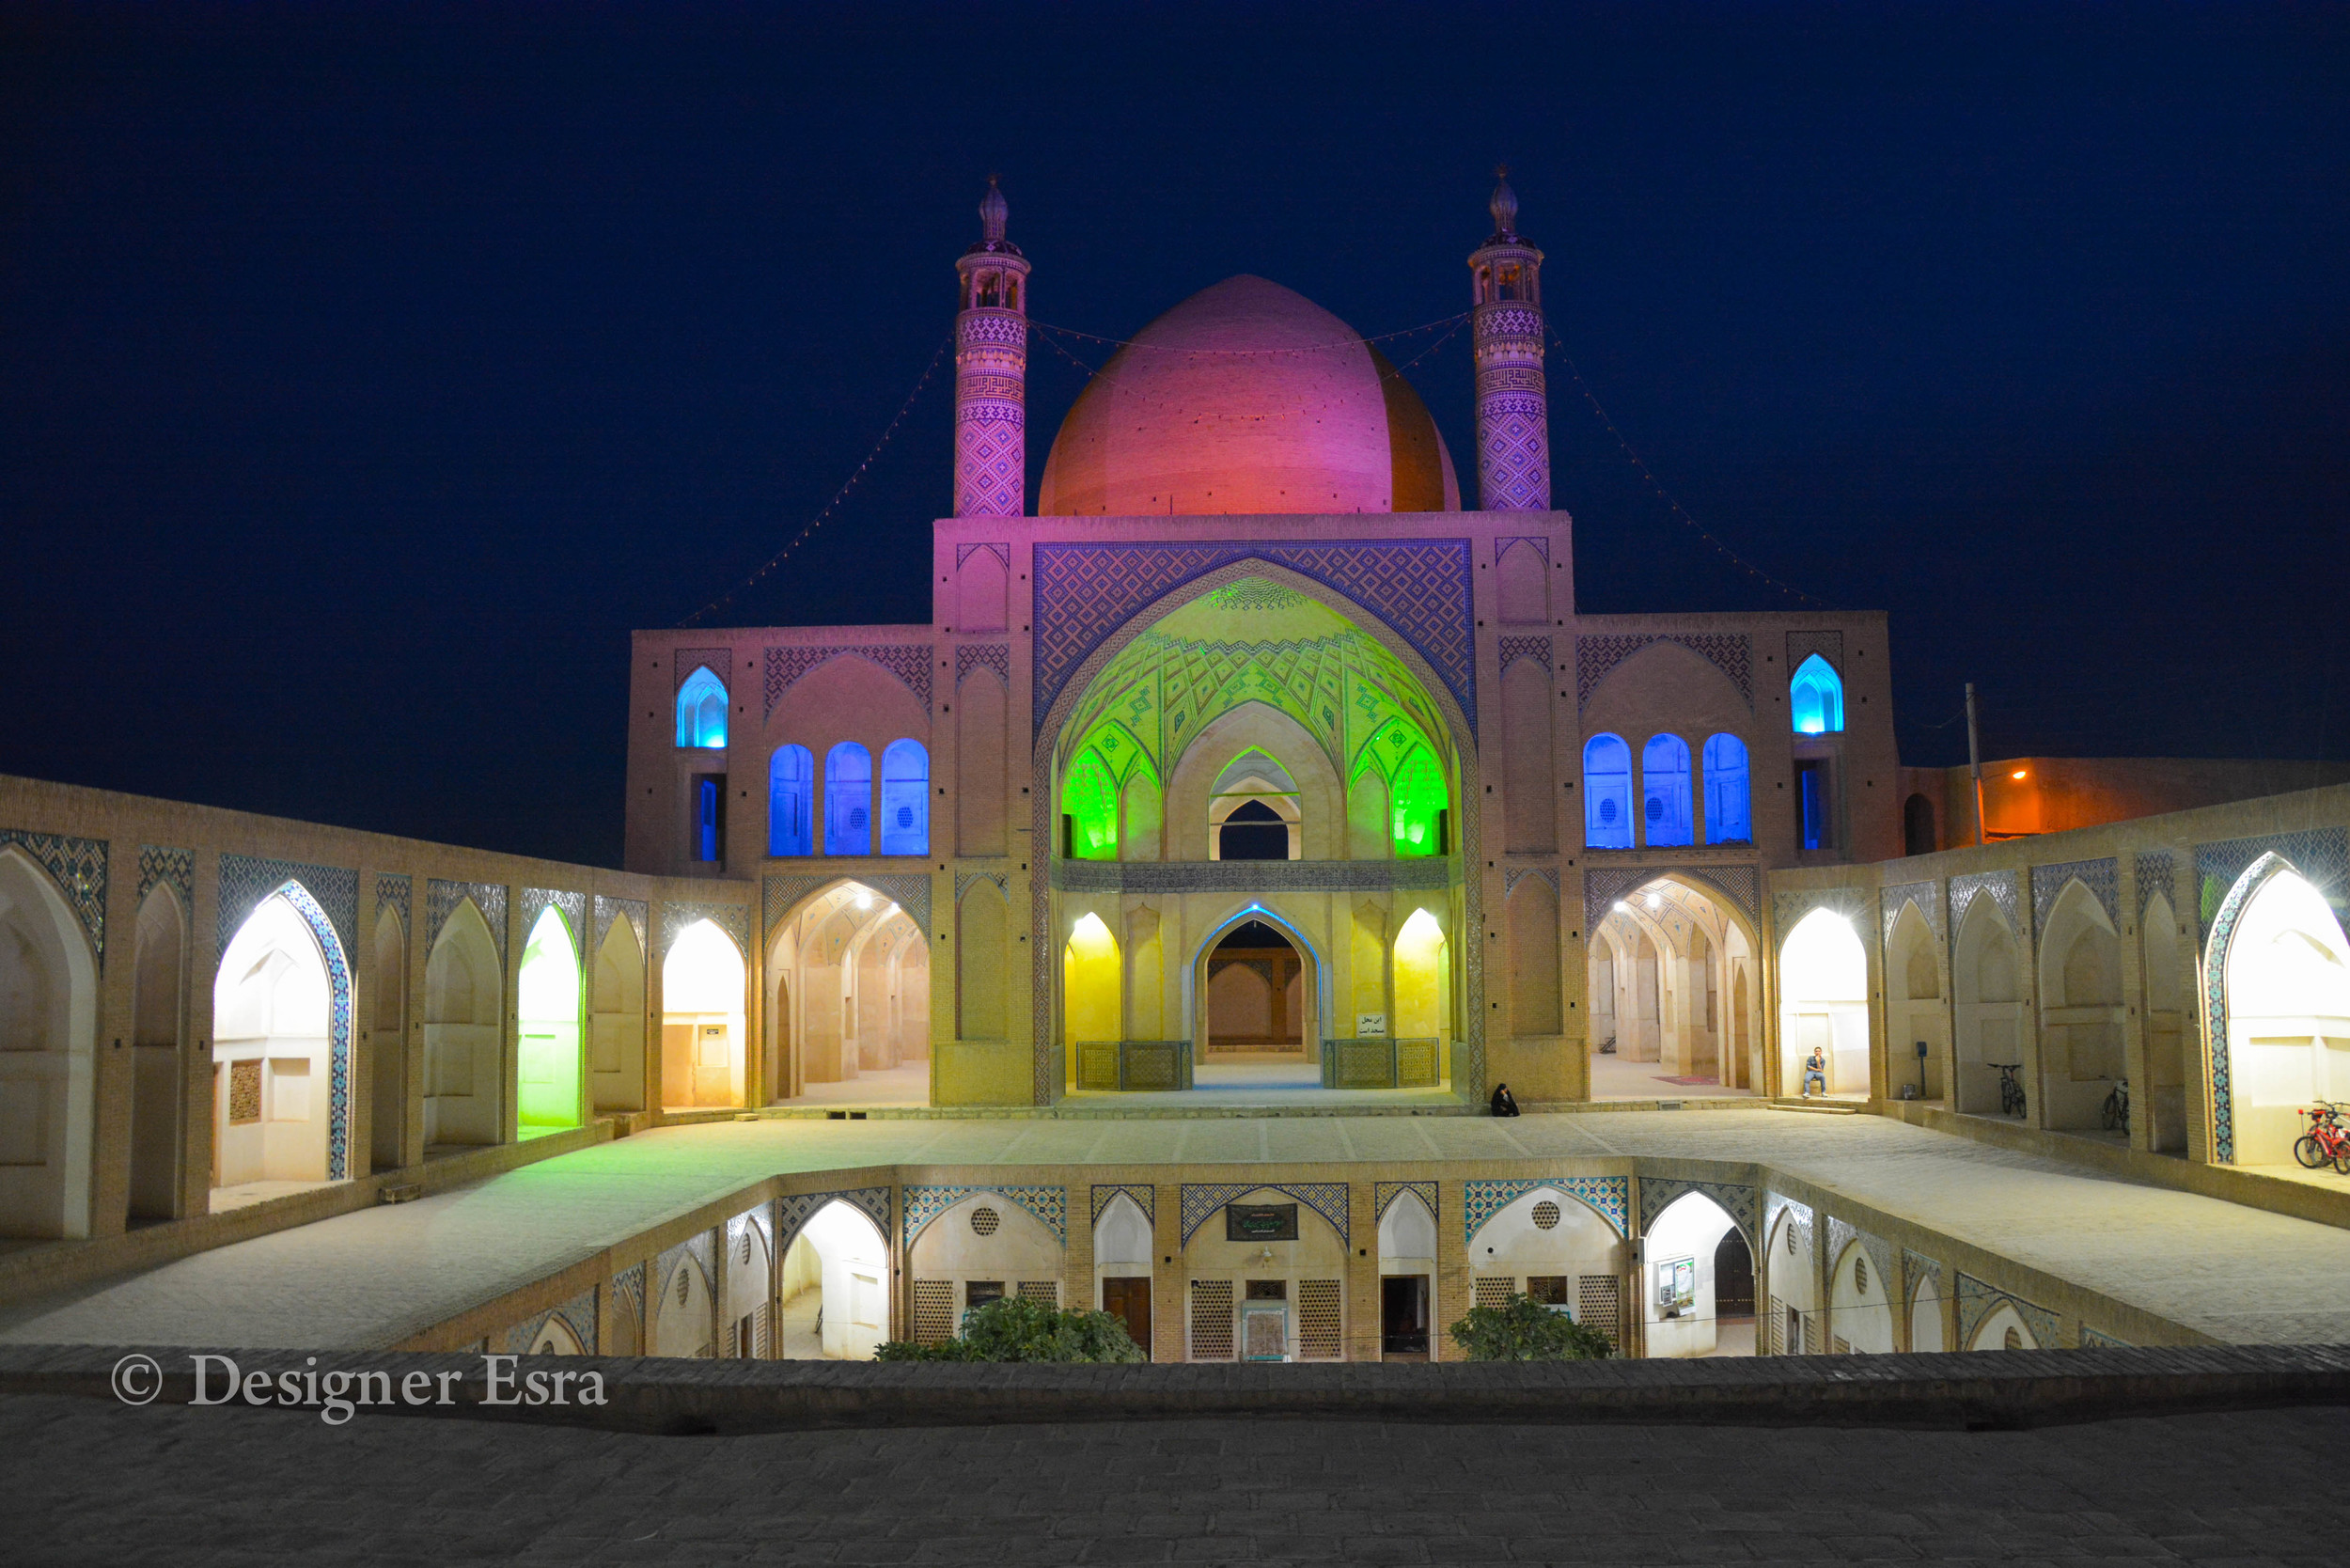 Agha Bozorg Mosque in Kashan, Iran at night